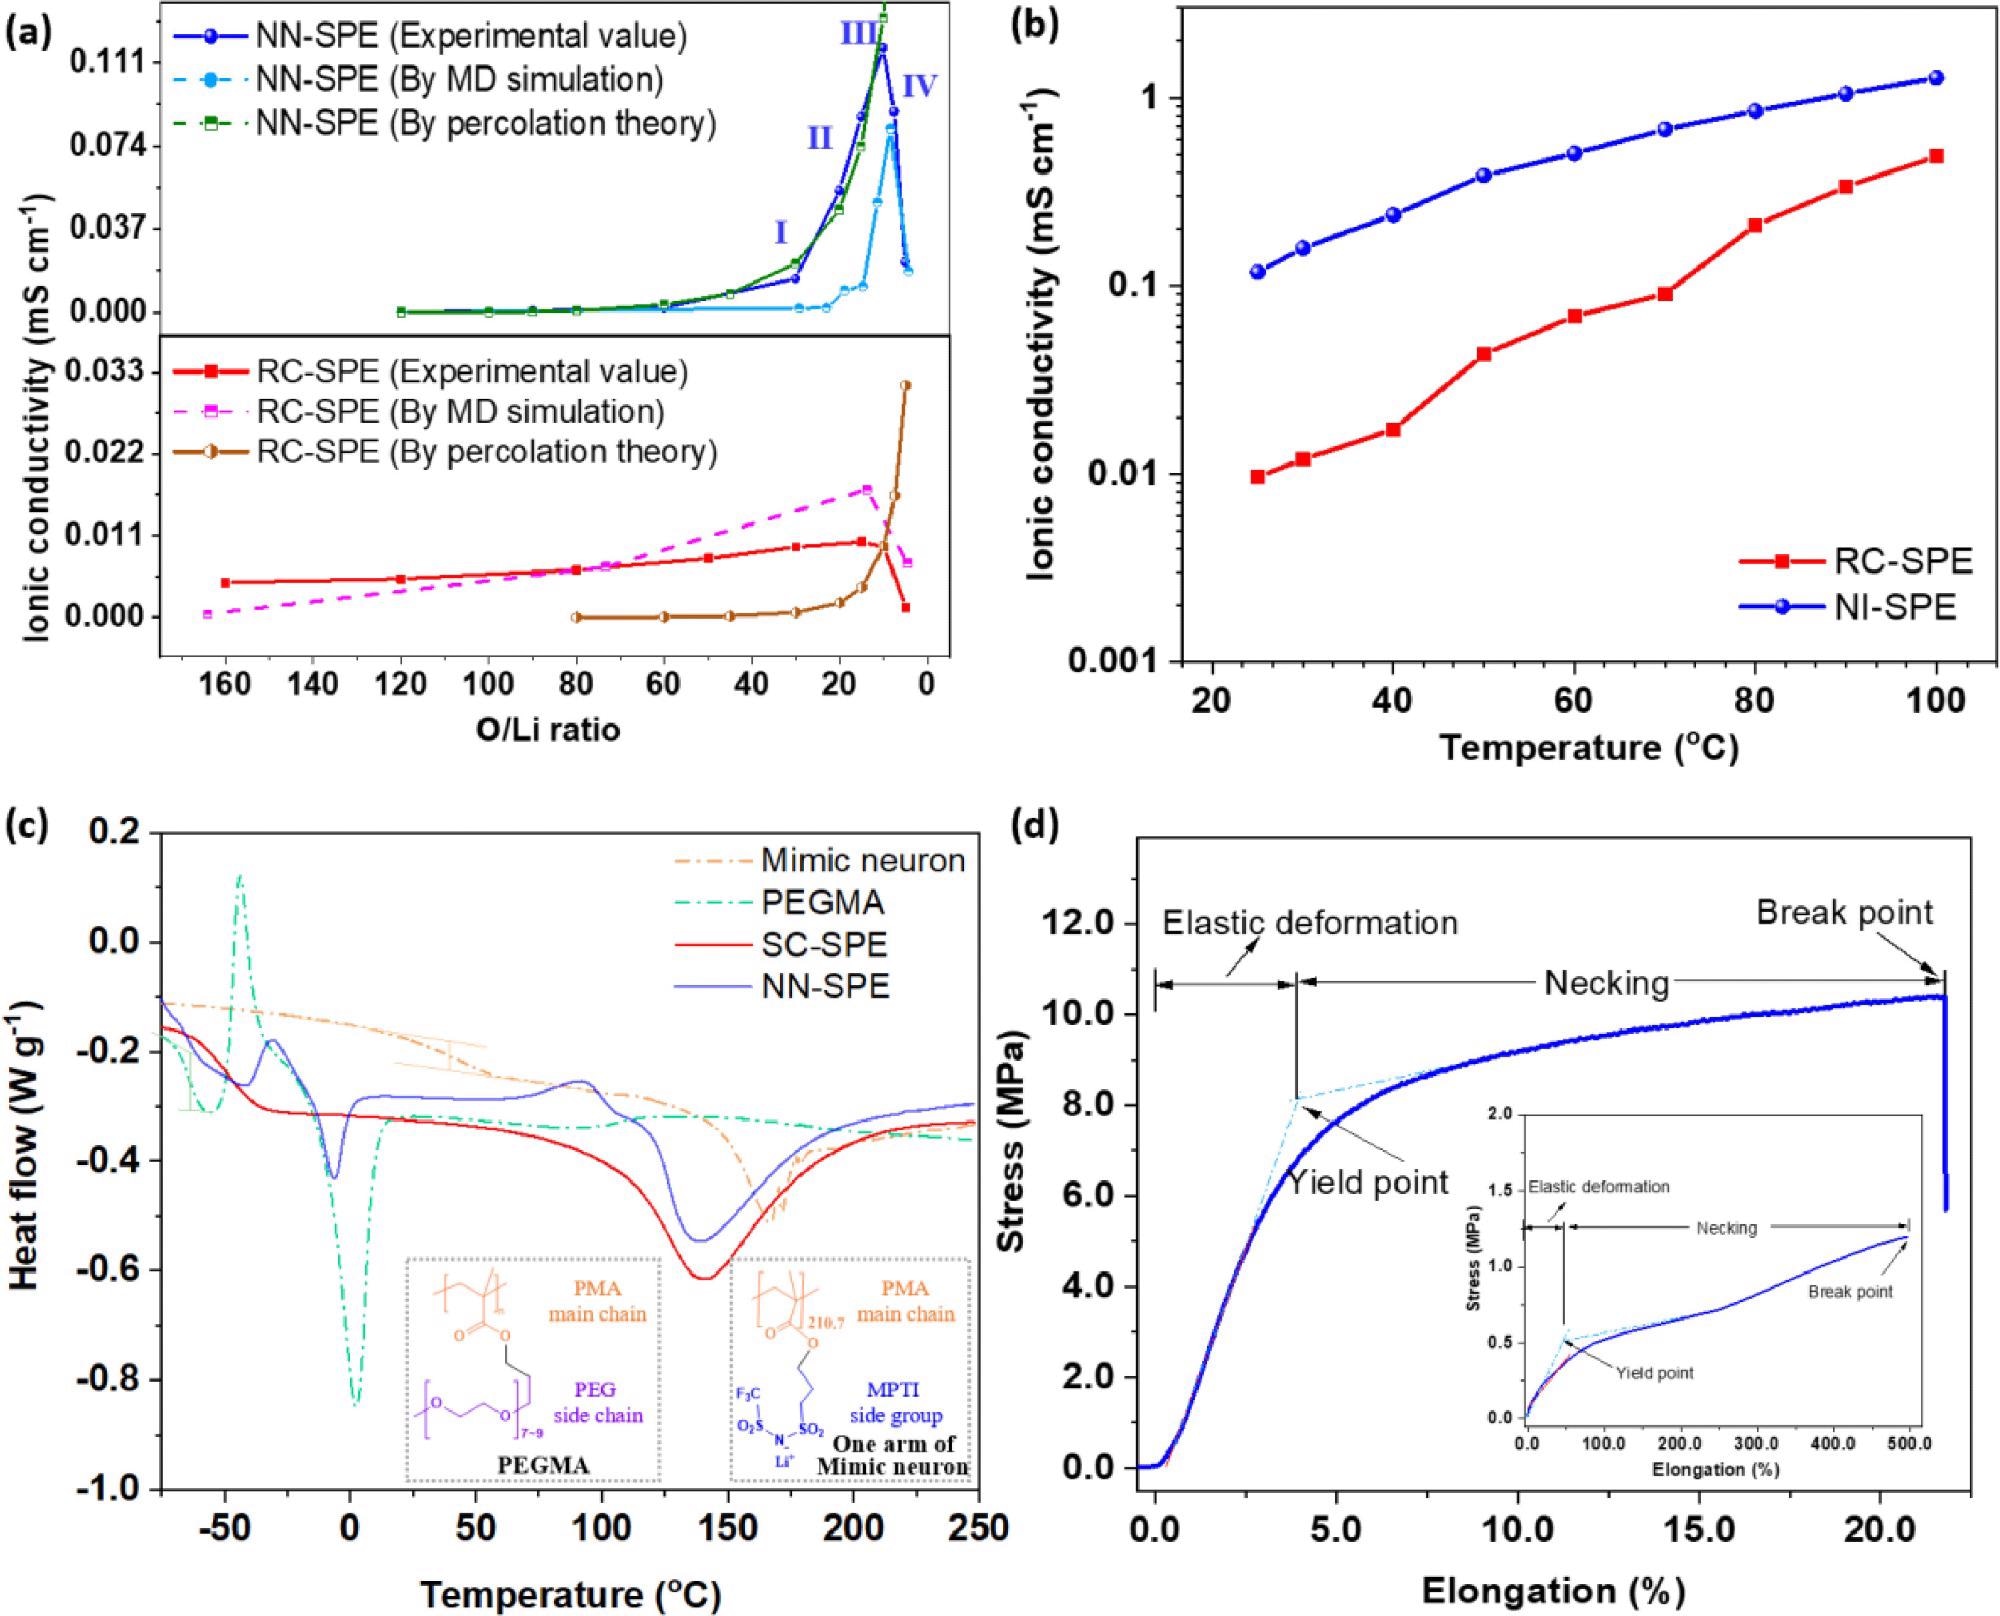 (a) Experimental and the simulated lithium-ion conductivities of NN-SPE and RC-SPE under various O/Li values. The O/Li value was converted from the mass content of the Li-MPTI group (?, %) using the equation "O/Li=(1-?)/(0.236?)". (b) Lithium-ion conductivities of NN-SPE and RC-SPE at the optimum O/Li ratio for NN-SPE (9.52) under different temperatures. (c) DSC curves of Mimic neuron, PEGMA, NN-SPE and RC-SPE; the inserted figure shows the structure of PEGMA and one of the arms of mimic neuron. (d) Mechanical strength curve of NN-SPE.